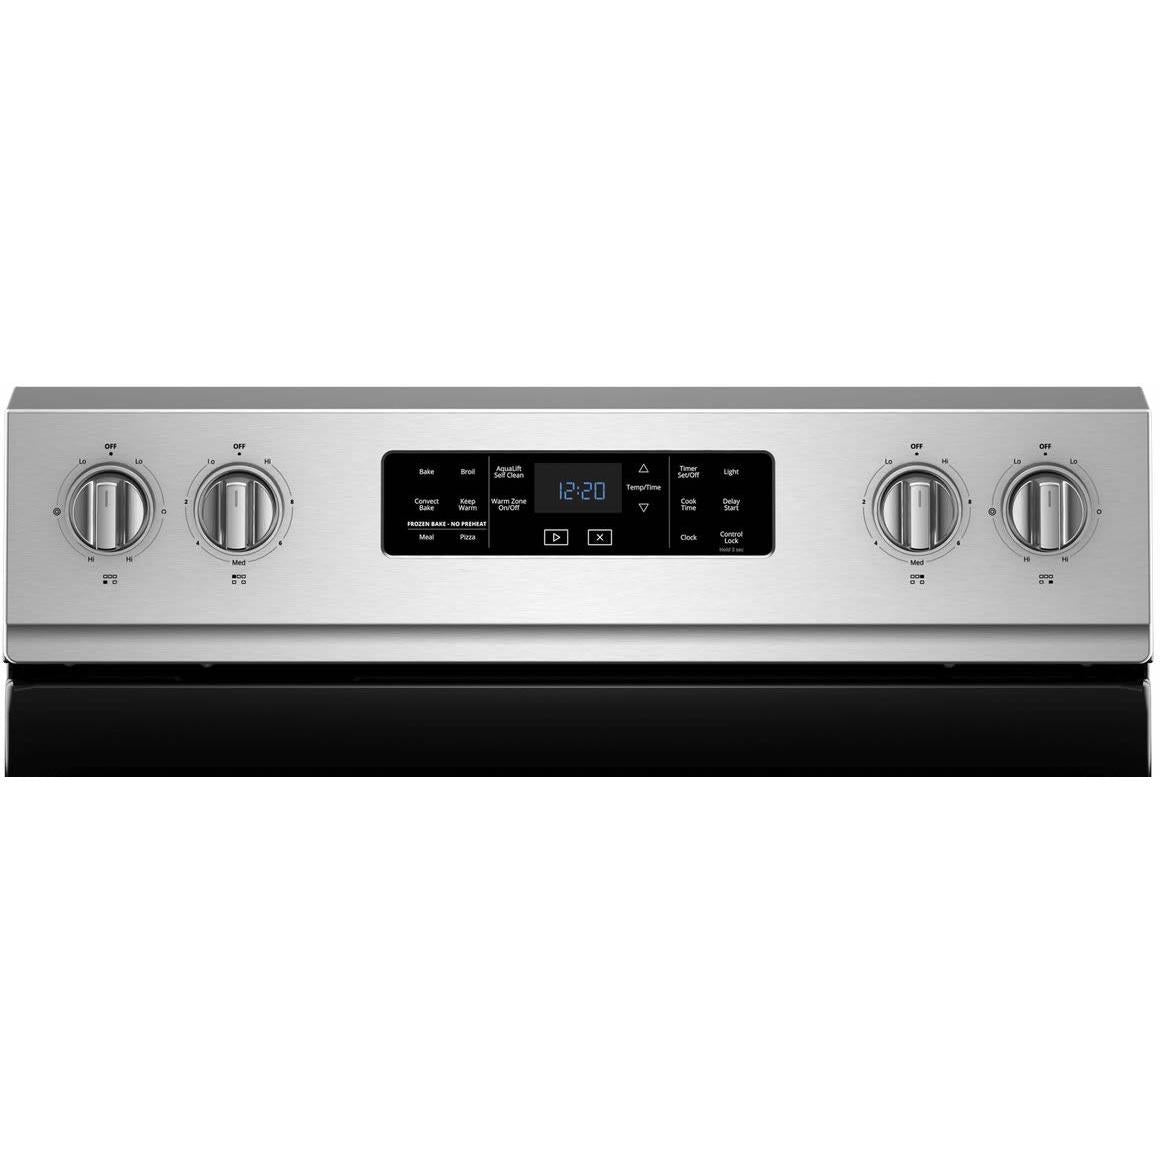 Whirlpool 30-inch Freestanding Electric Range with  Frozen Bake? Technology WFE775H0HZ